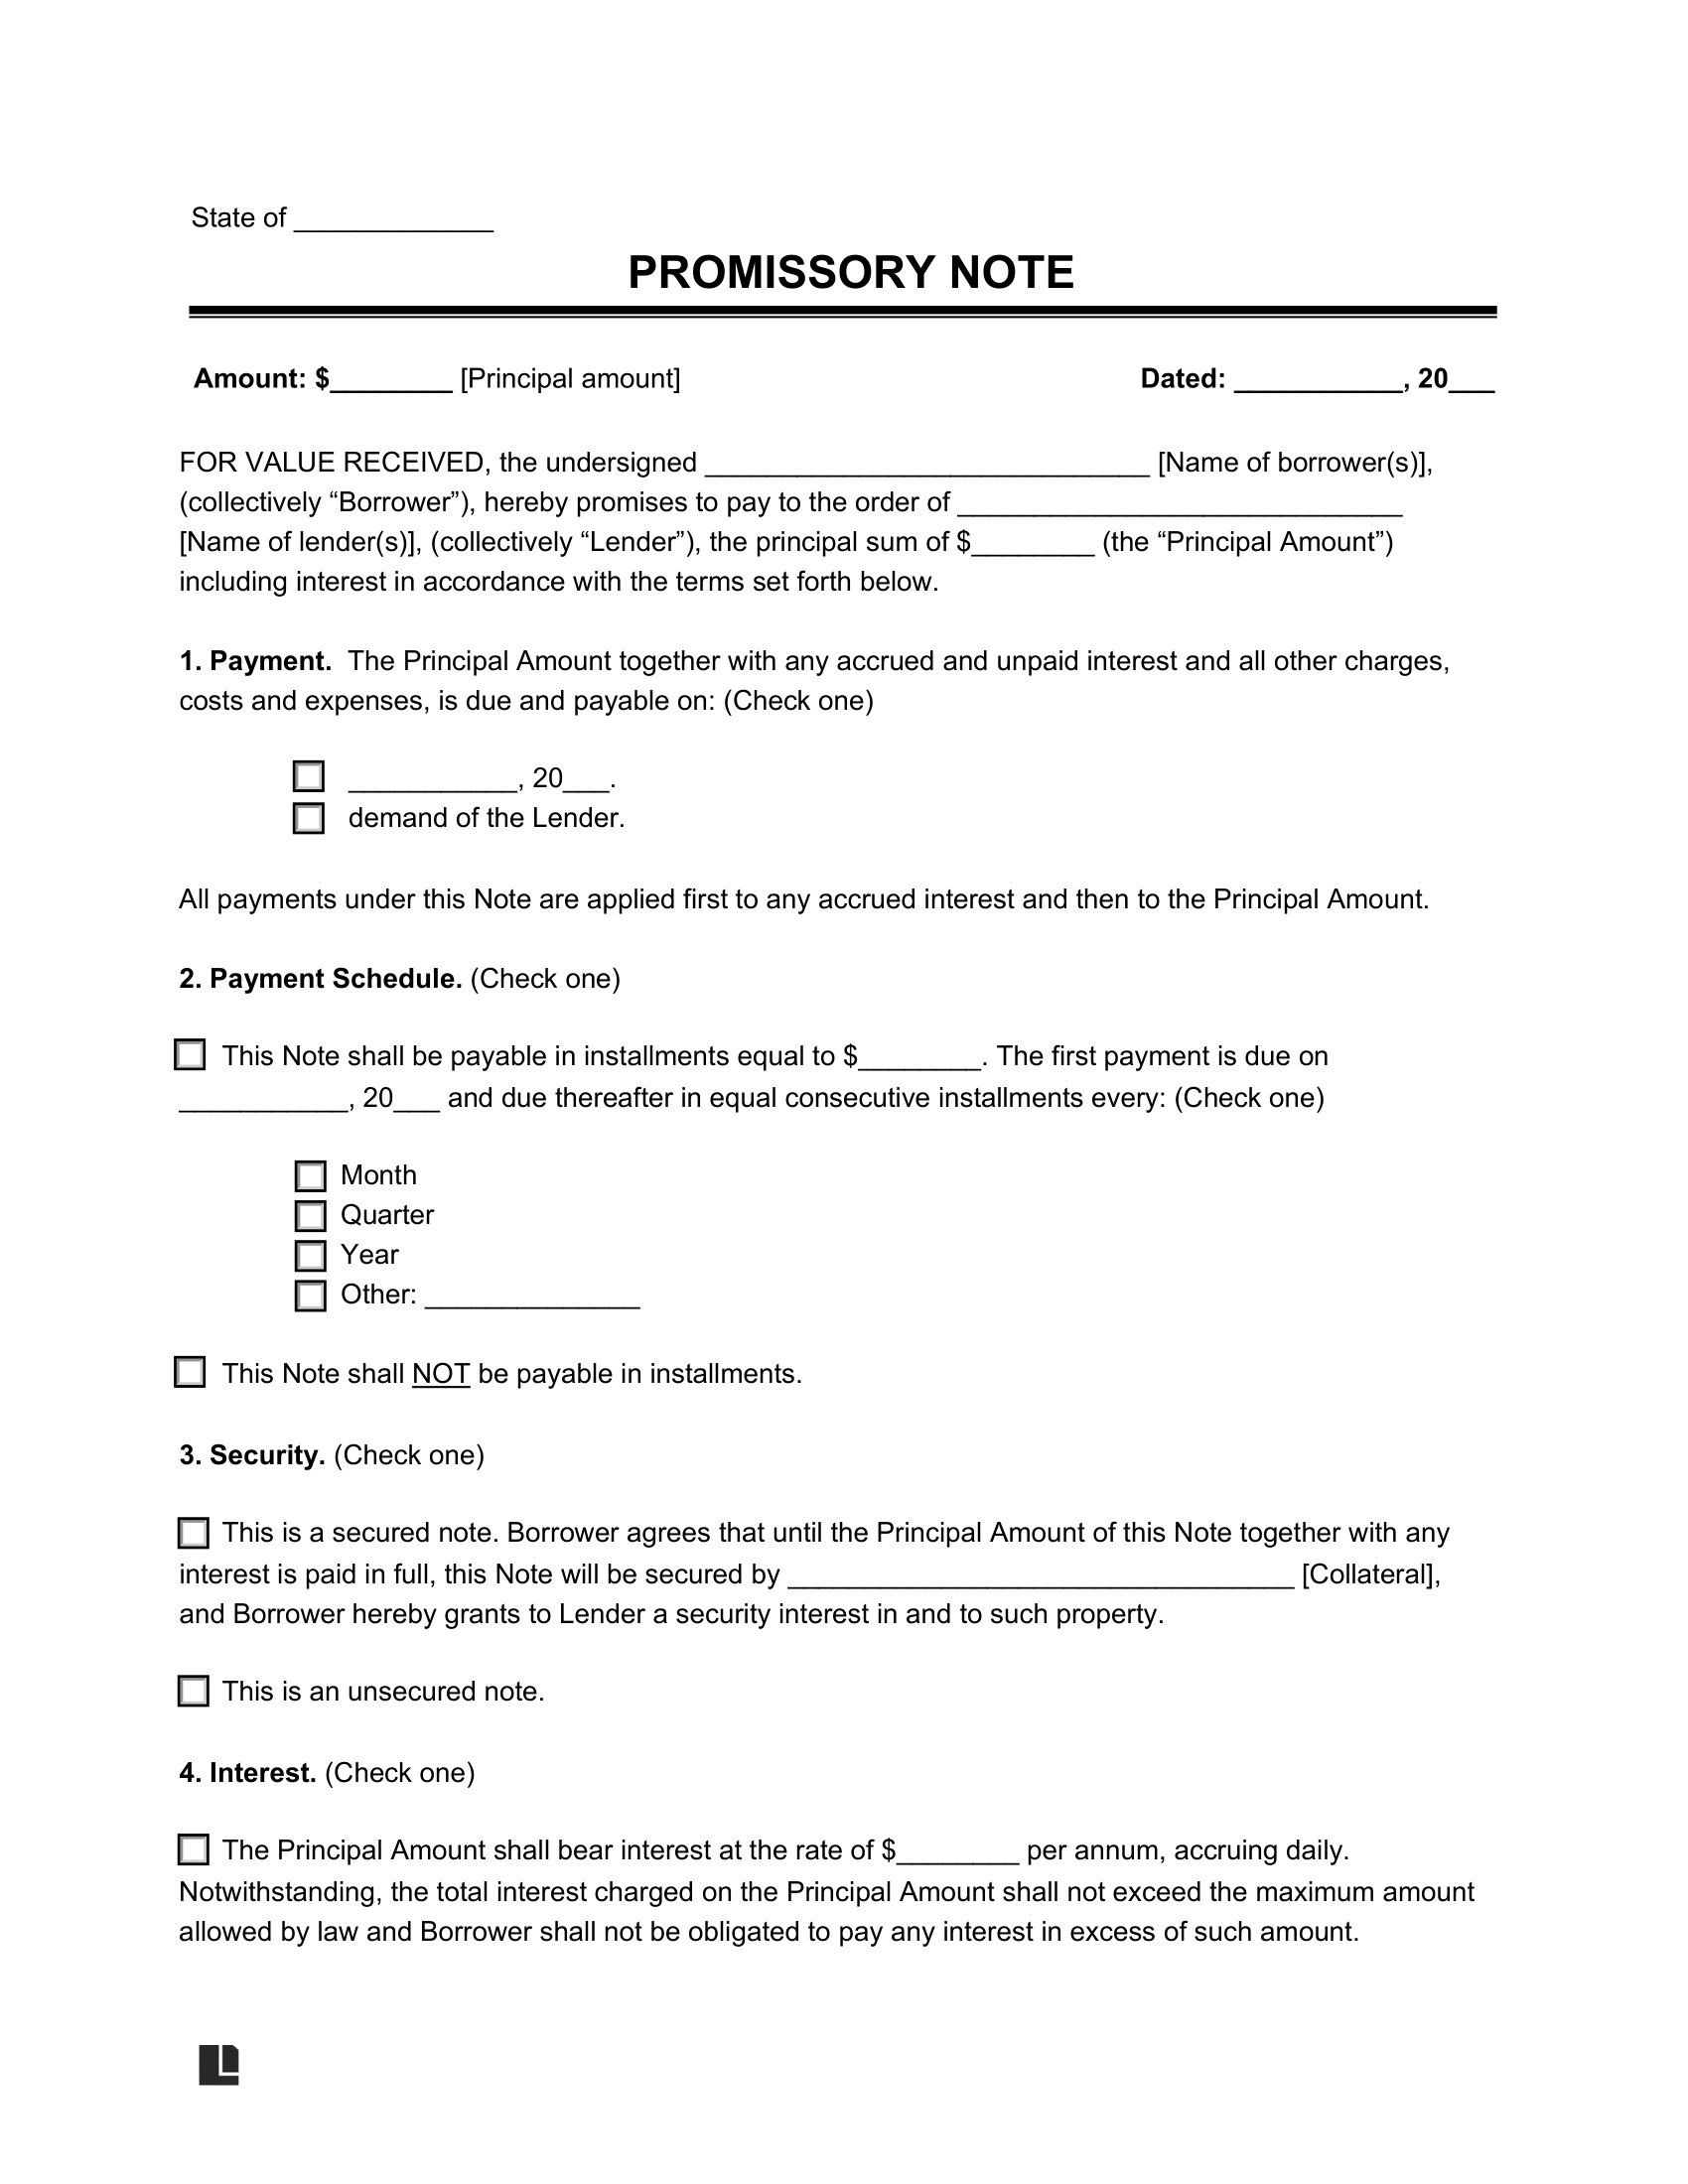 promissory note template